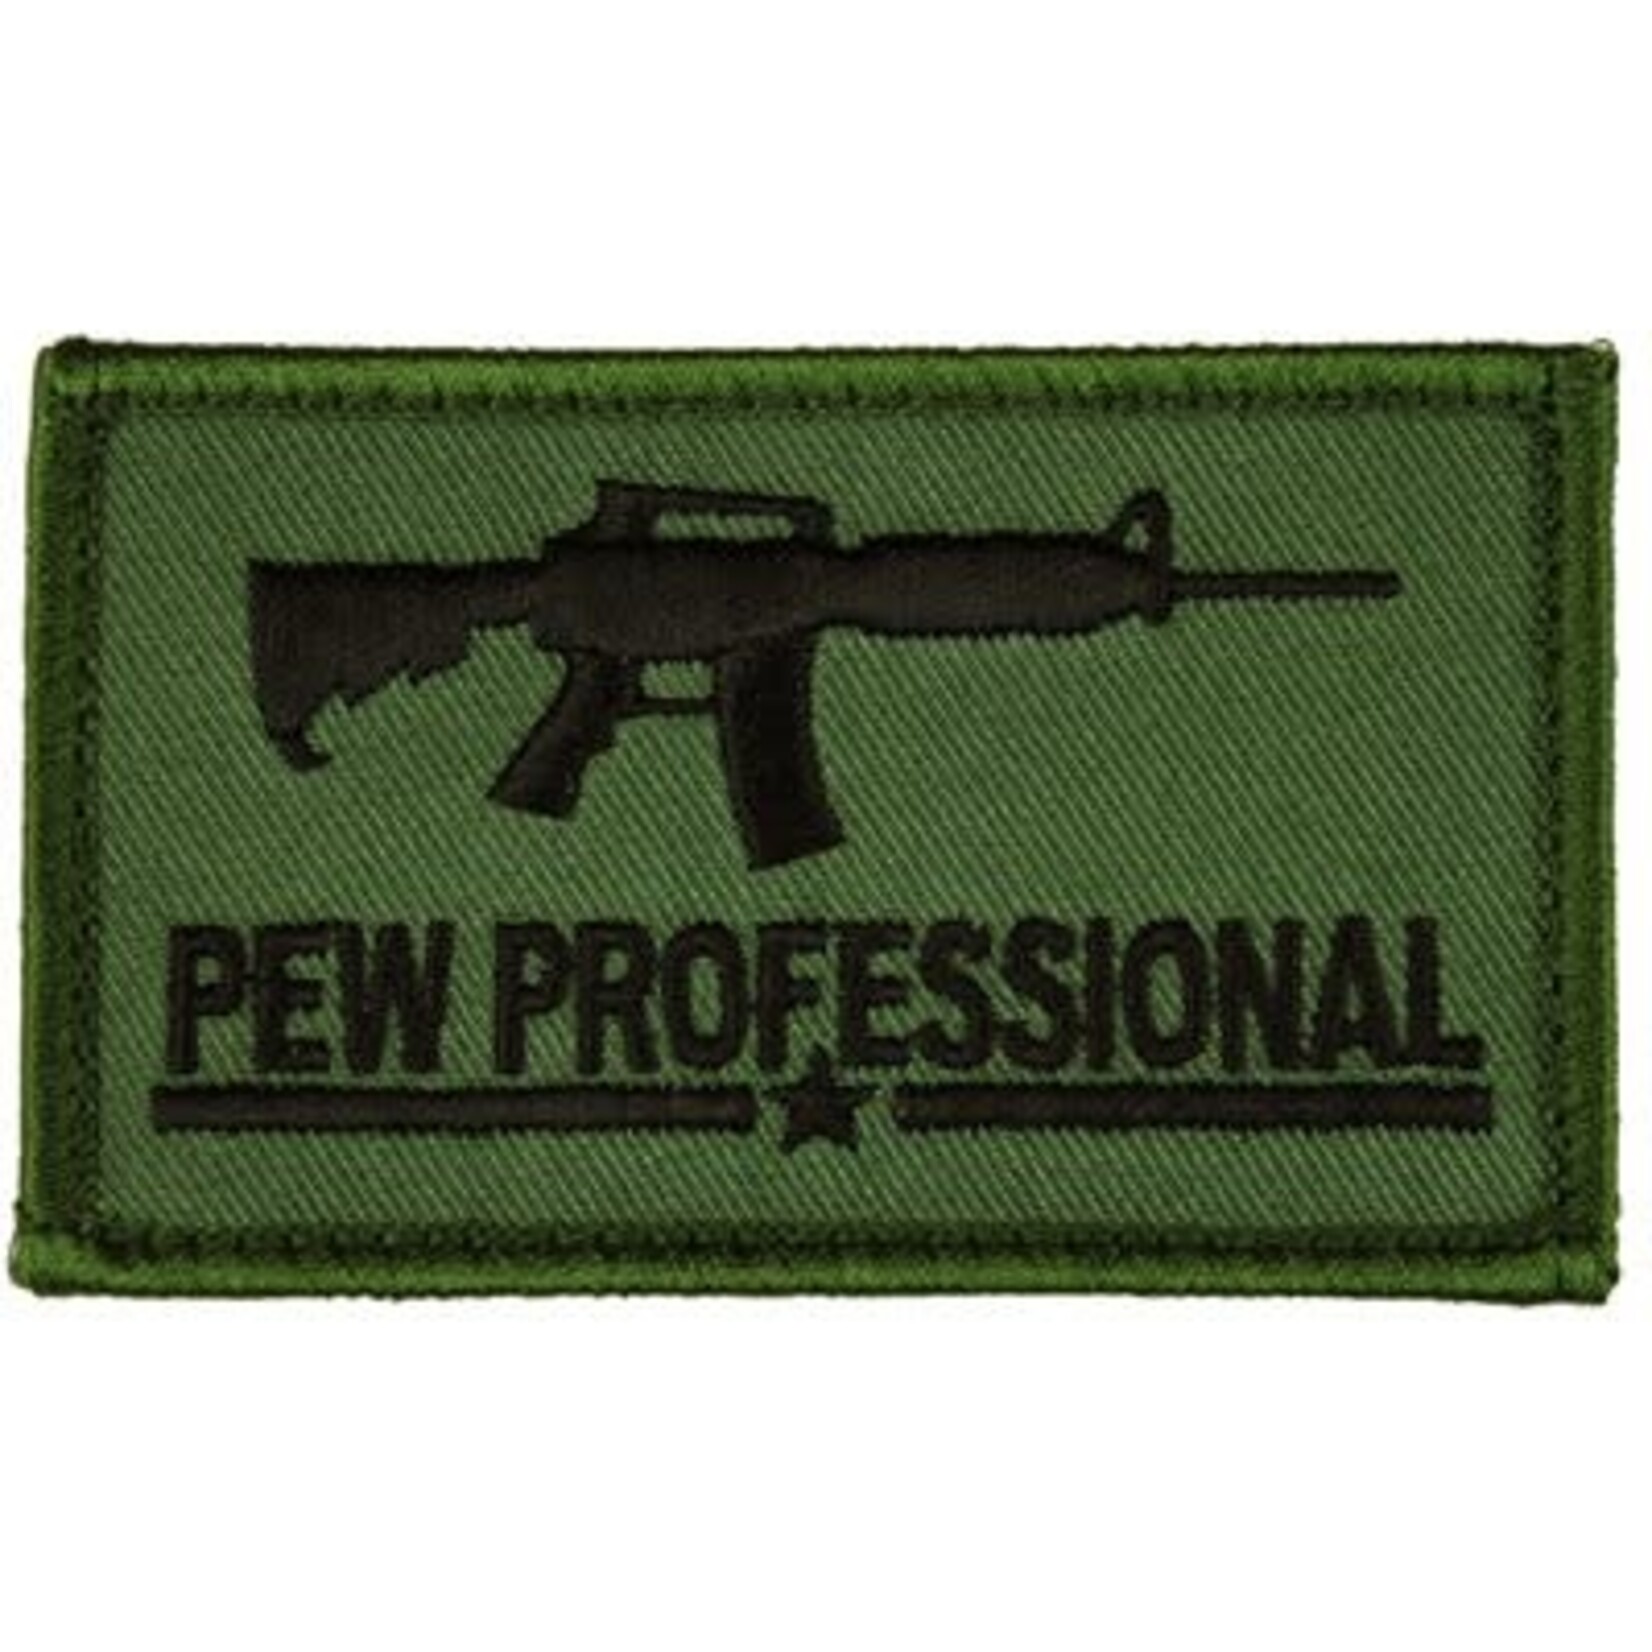 Pew Professional Patch